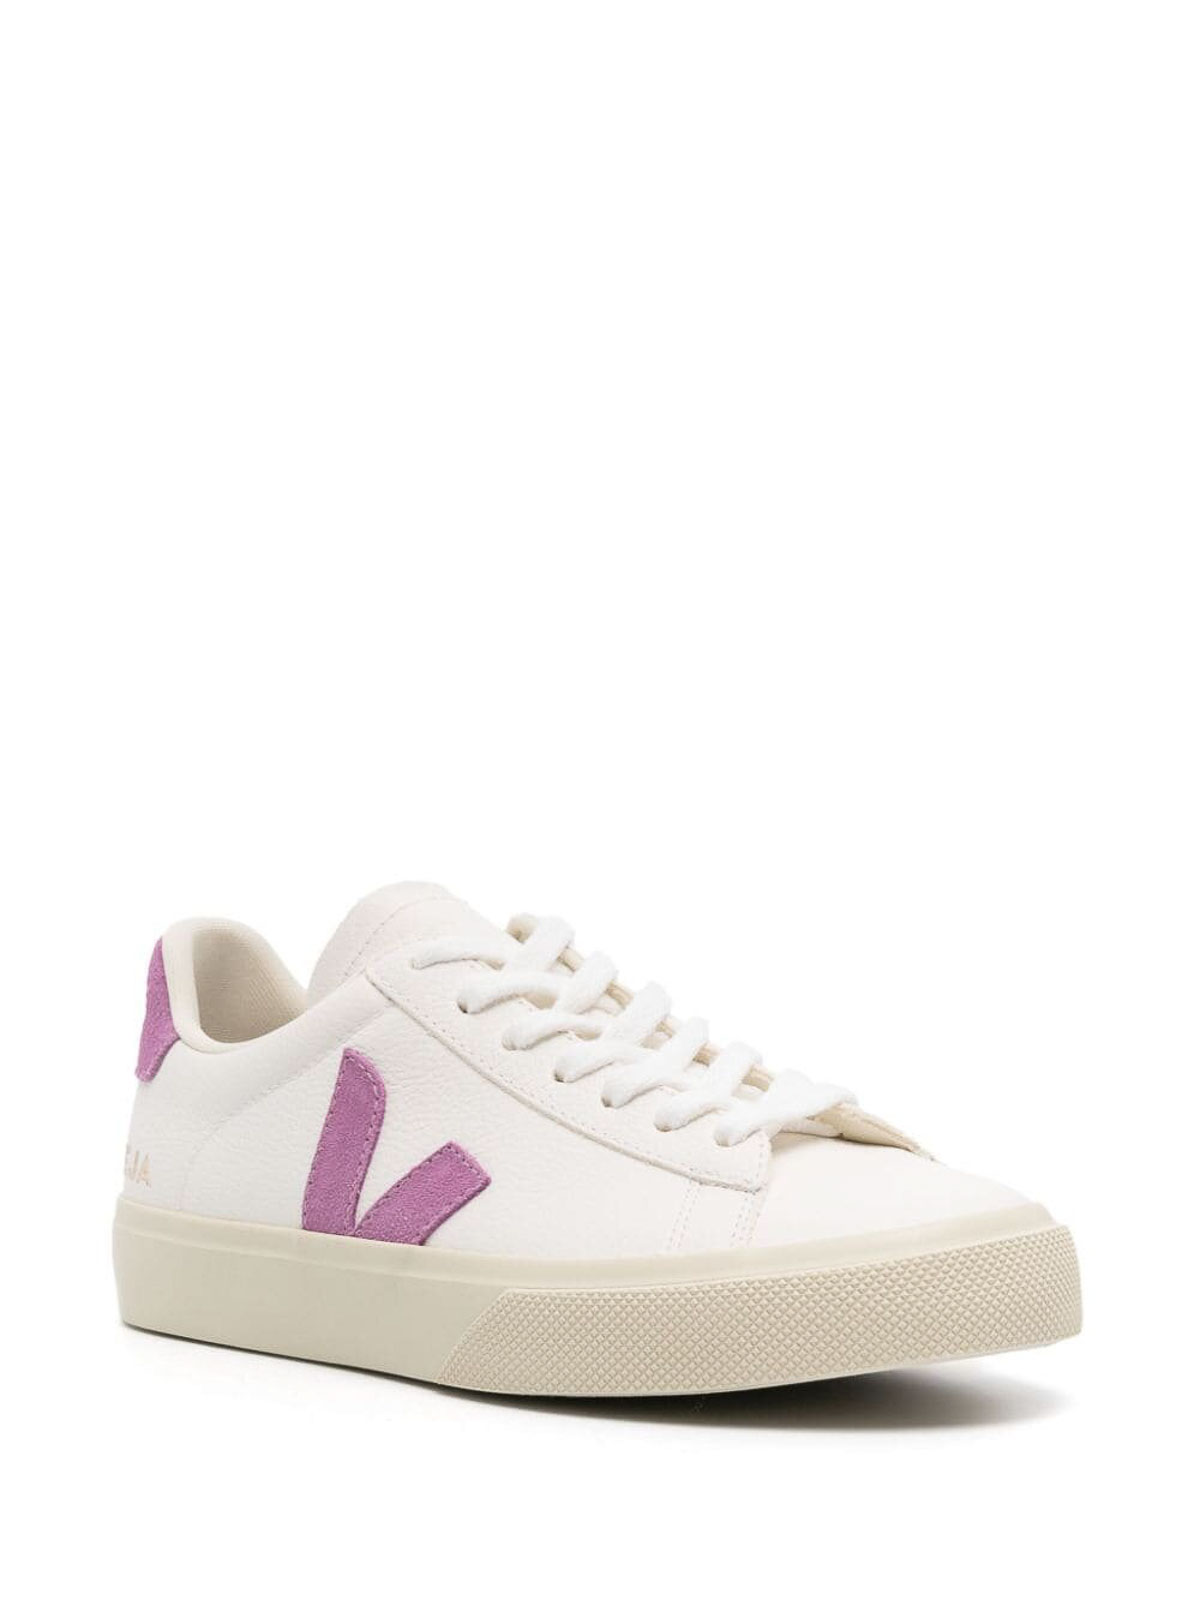 Shop Veja Leather Logo Sneakers In White